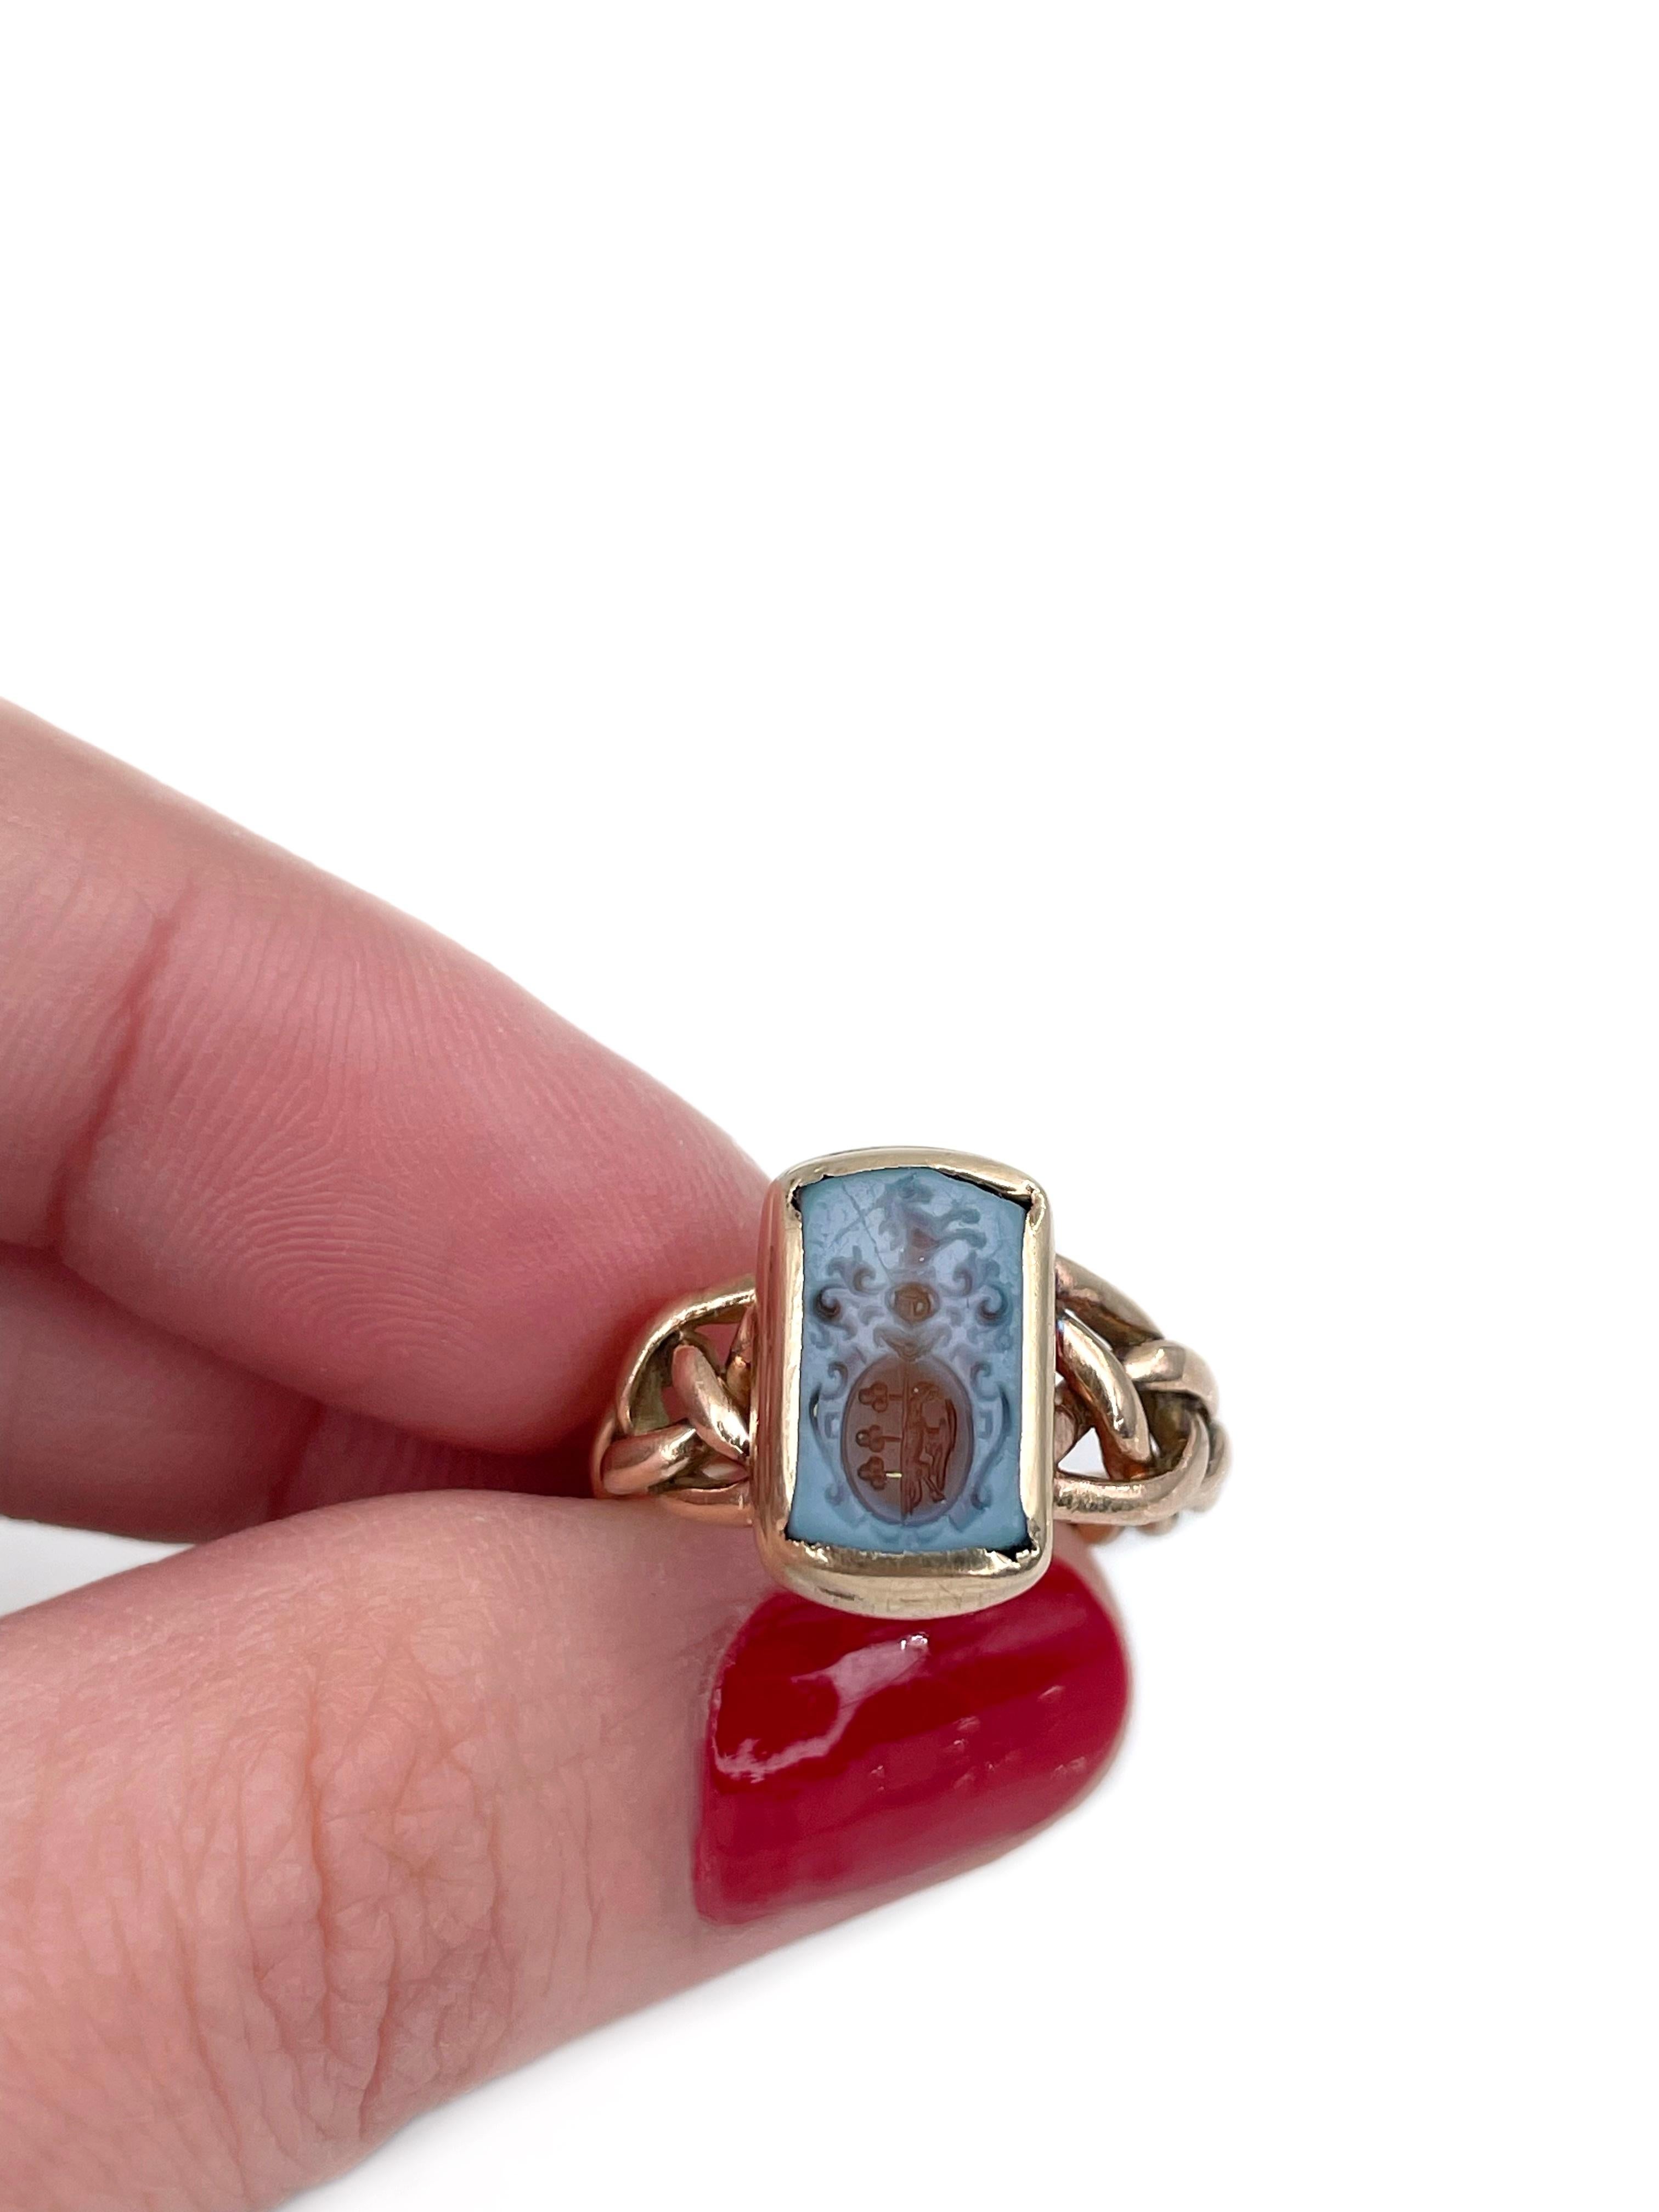 This is a Victorian heraldic signet ring crafted in 9K gold. Circa 1850. 

It features a carved chalcedony intaglio depicting a Coat of Arms.  

Weight: 4.74g
Size: 16.5 (US 6)

———

If you have any questions, please feel free to ask. We describe